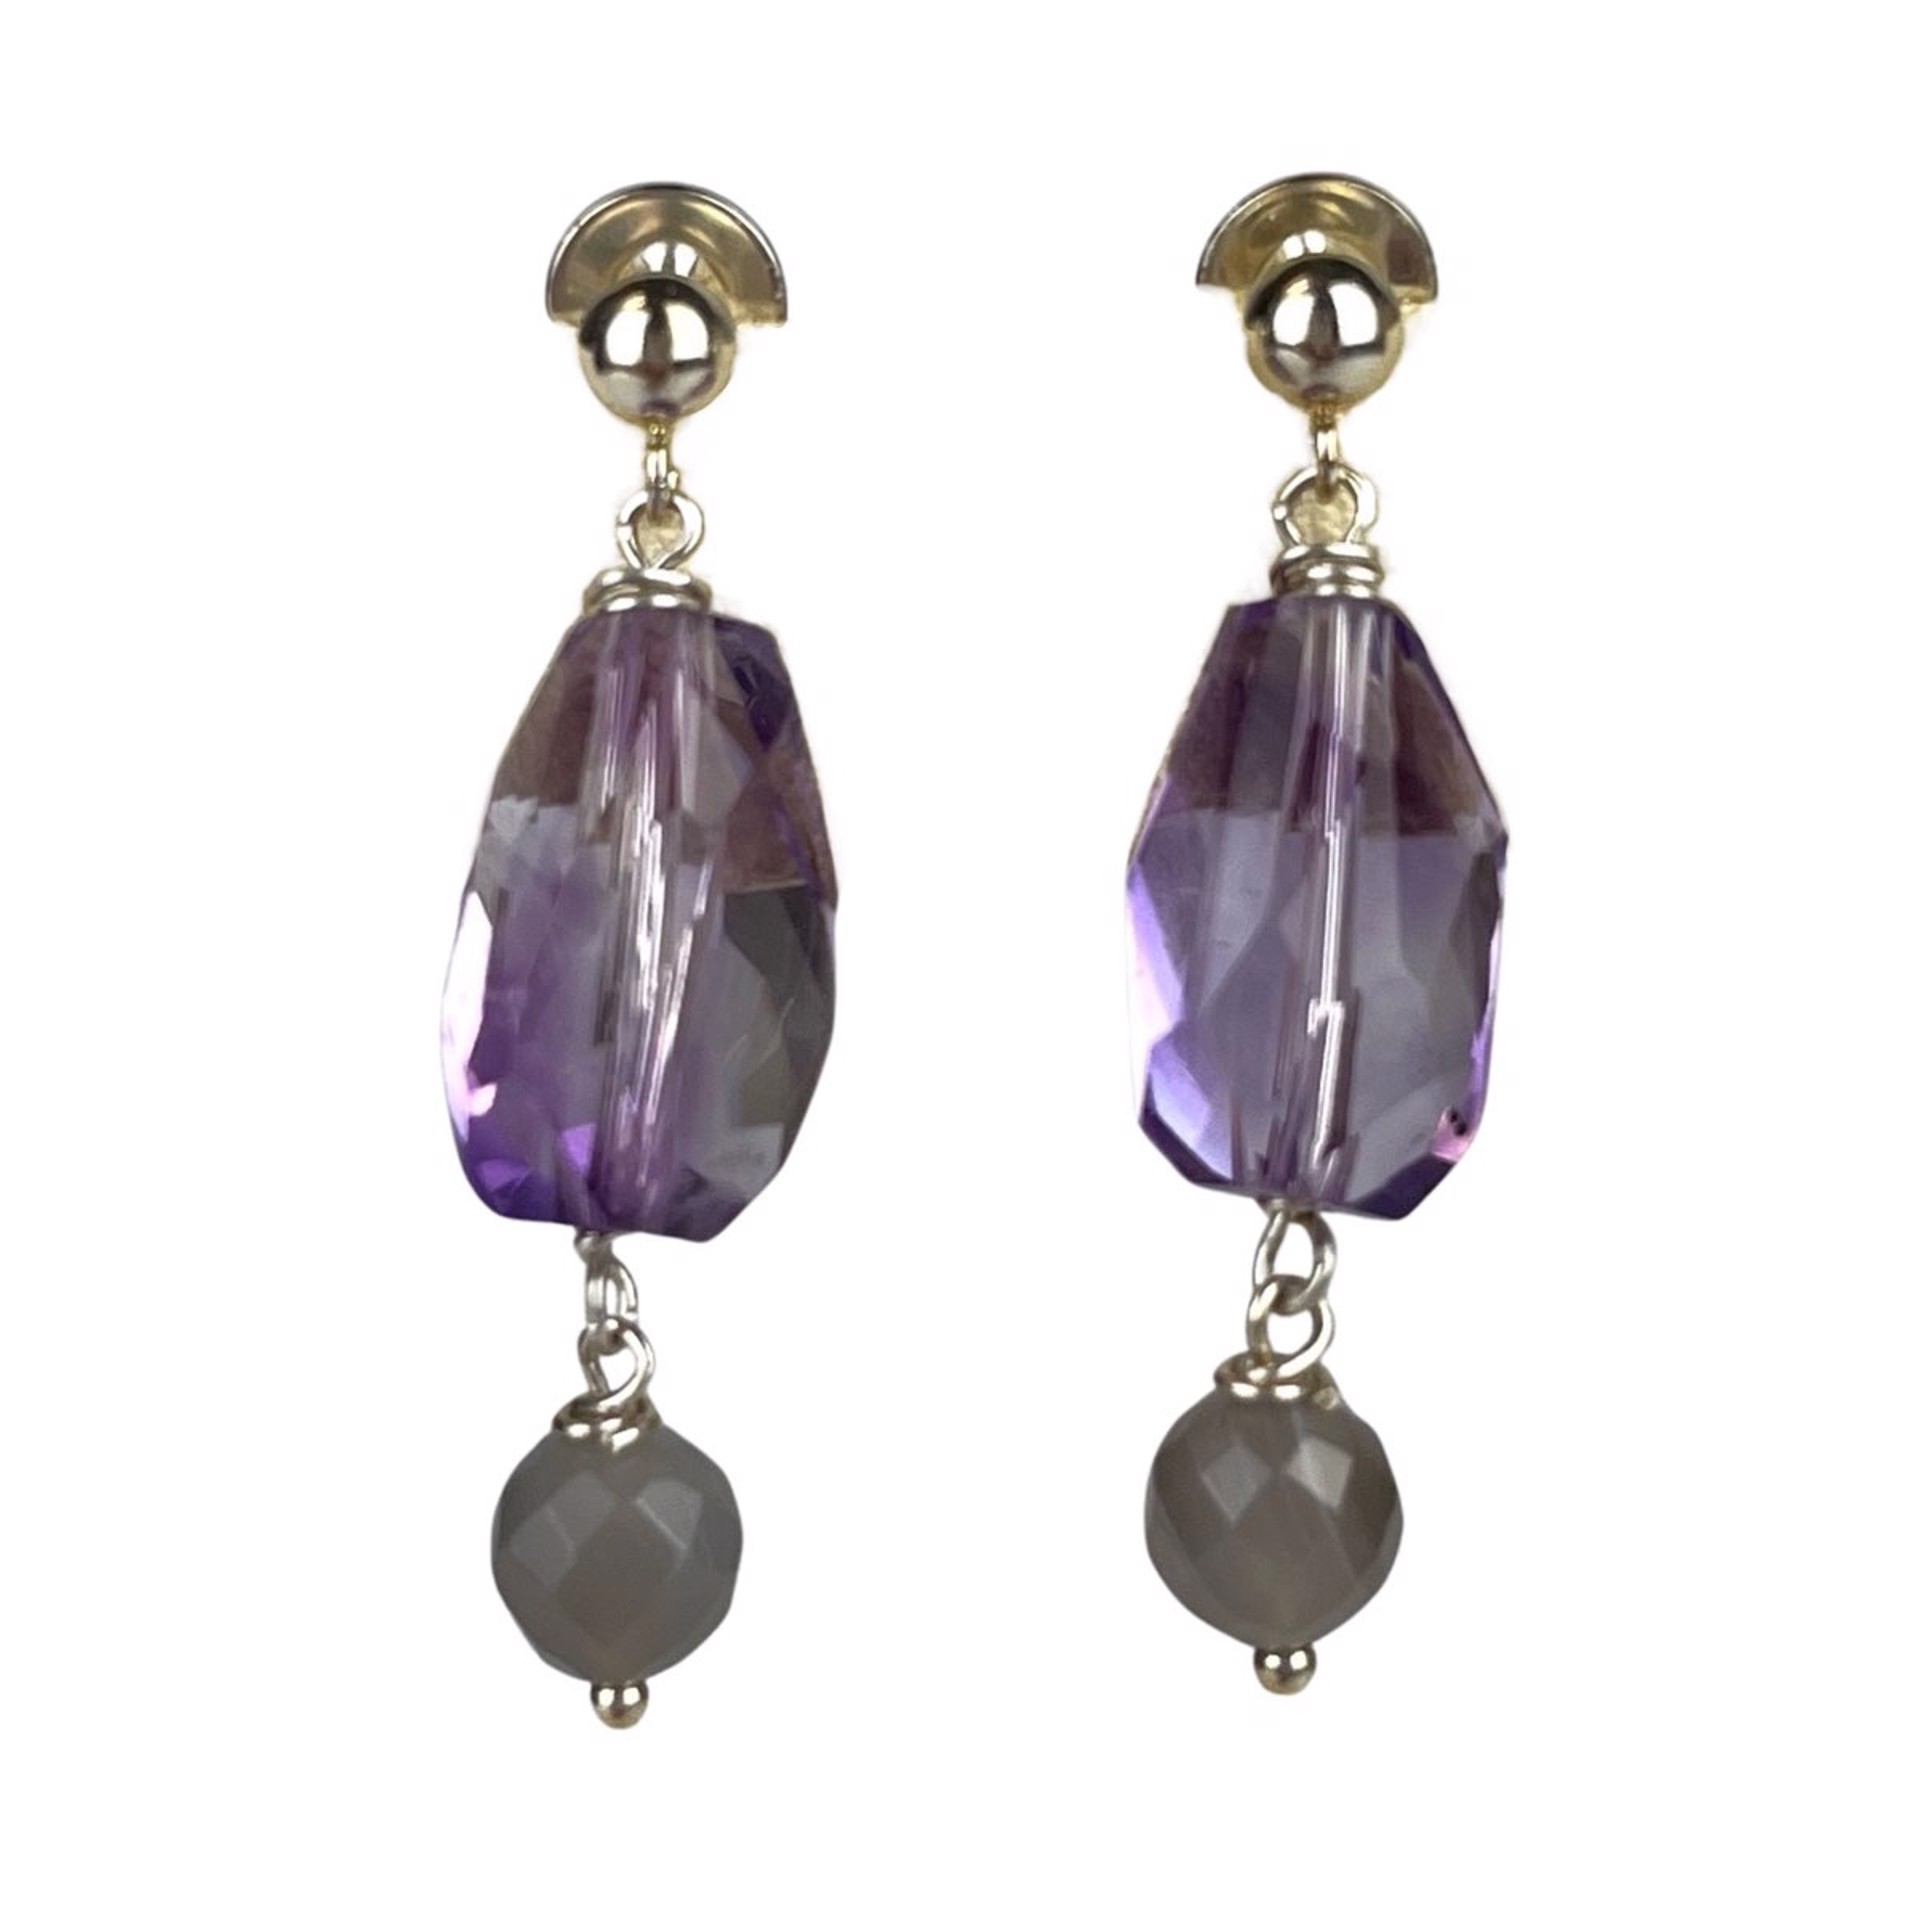 Chunky Amethyst with Botswana Drop Sterling Silver Earrings by Nola Smodic